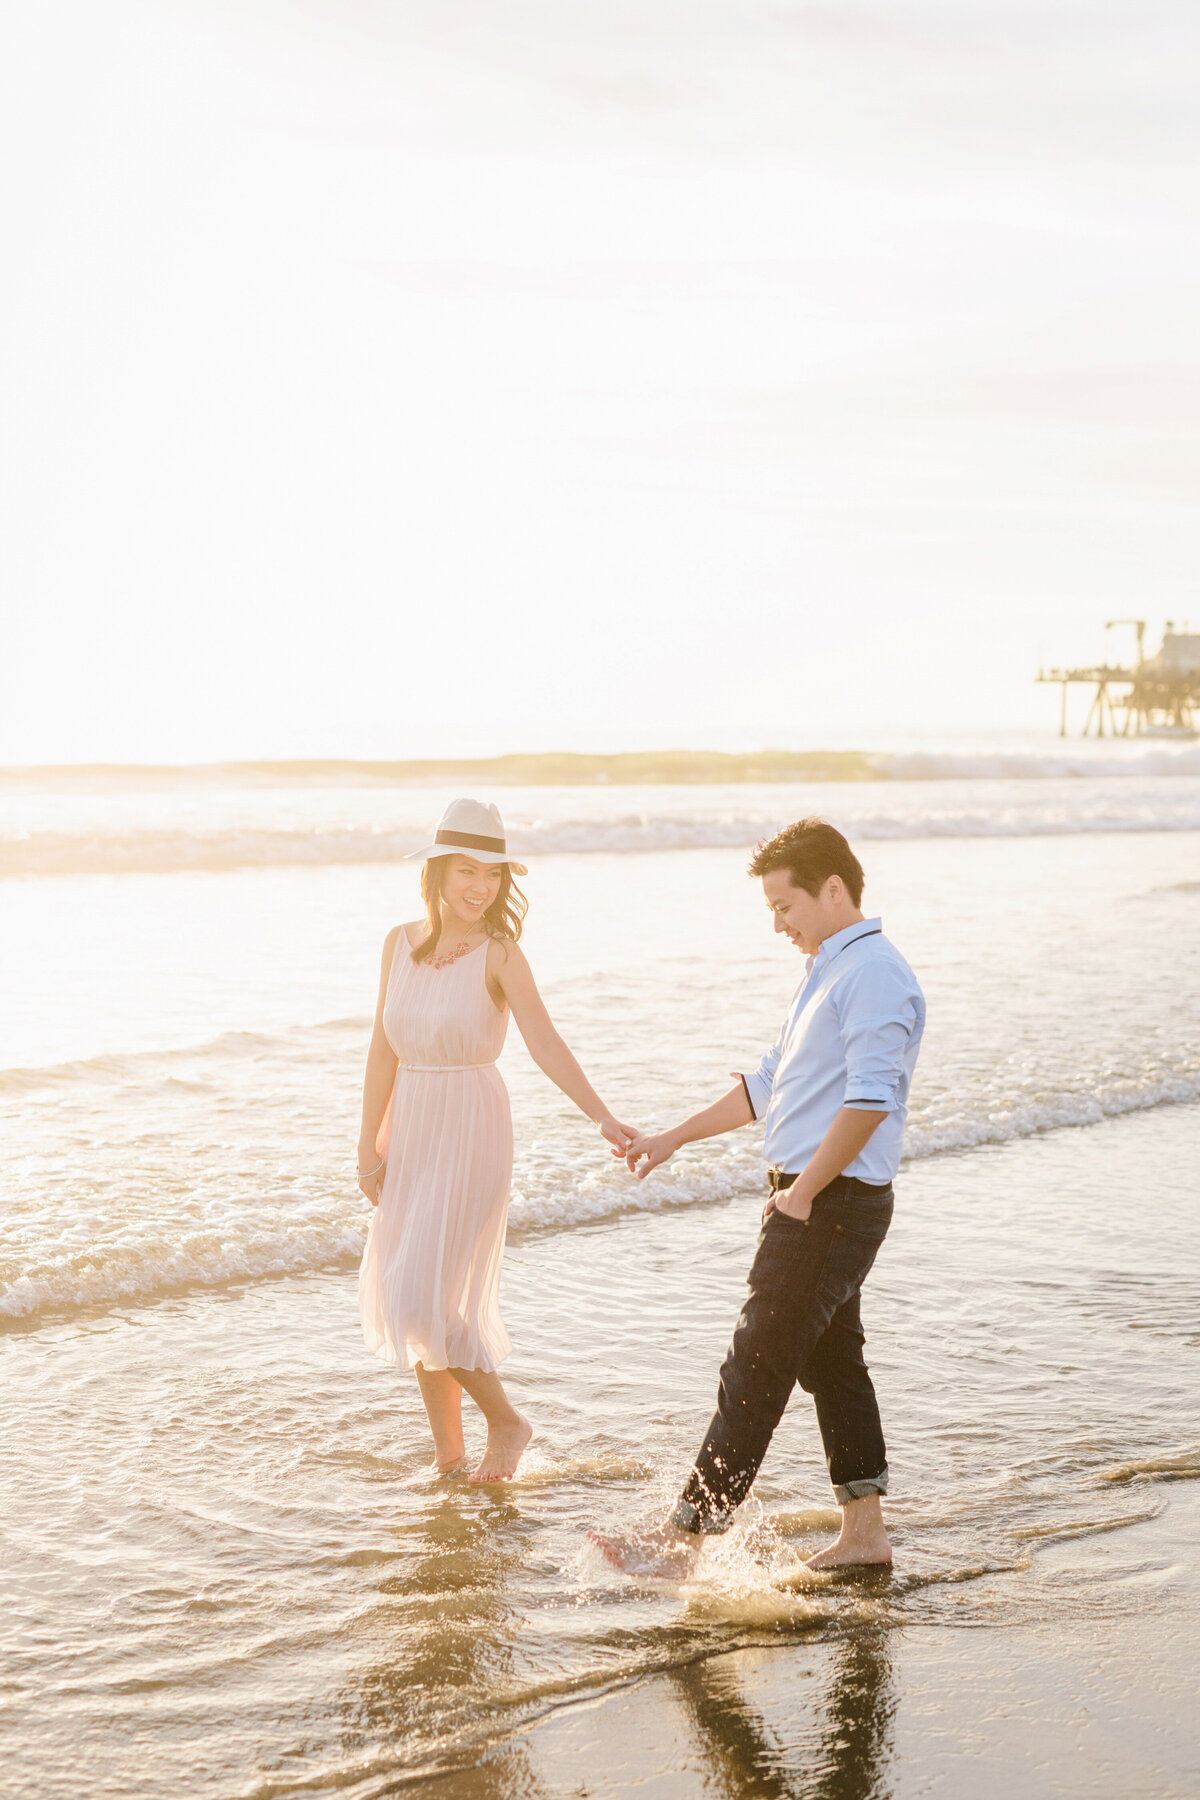 Best California and Texas Engagement Photographer-Jodee Debes Photography-58